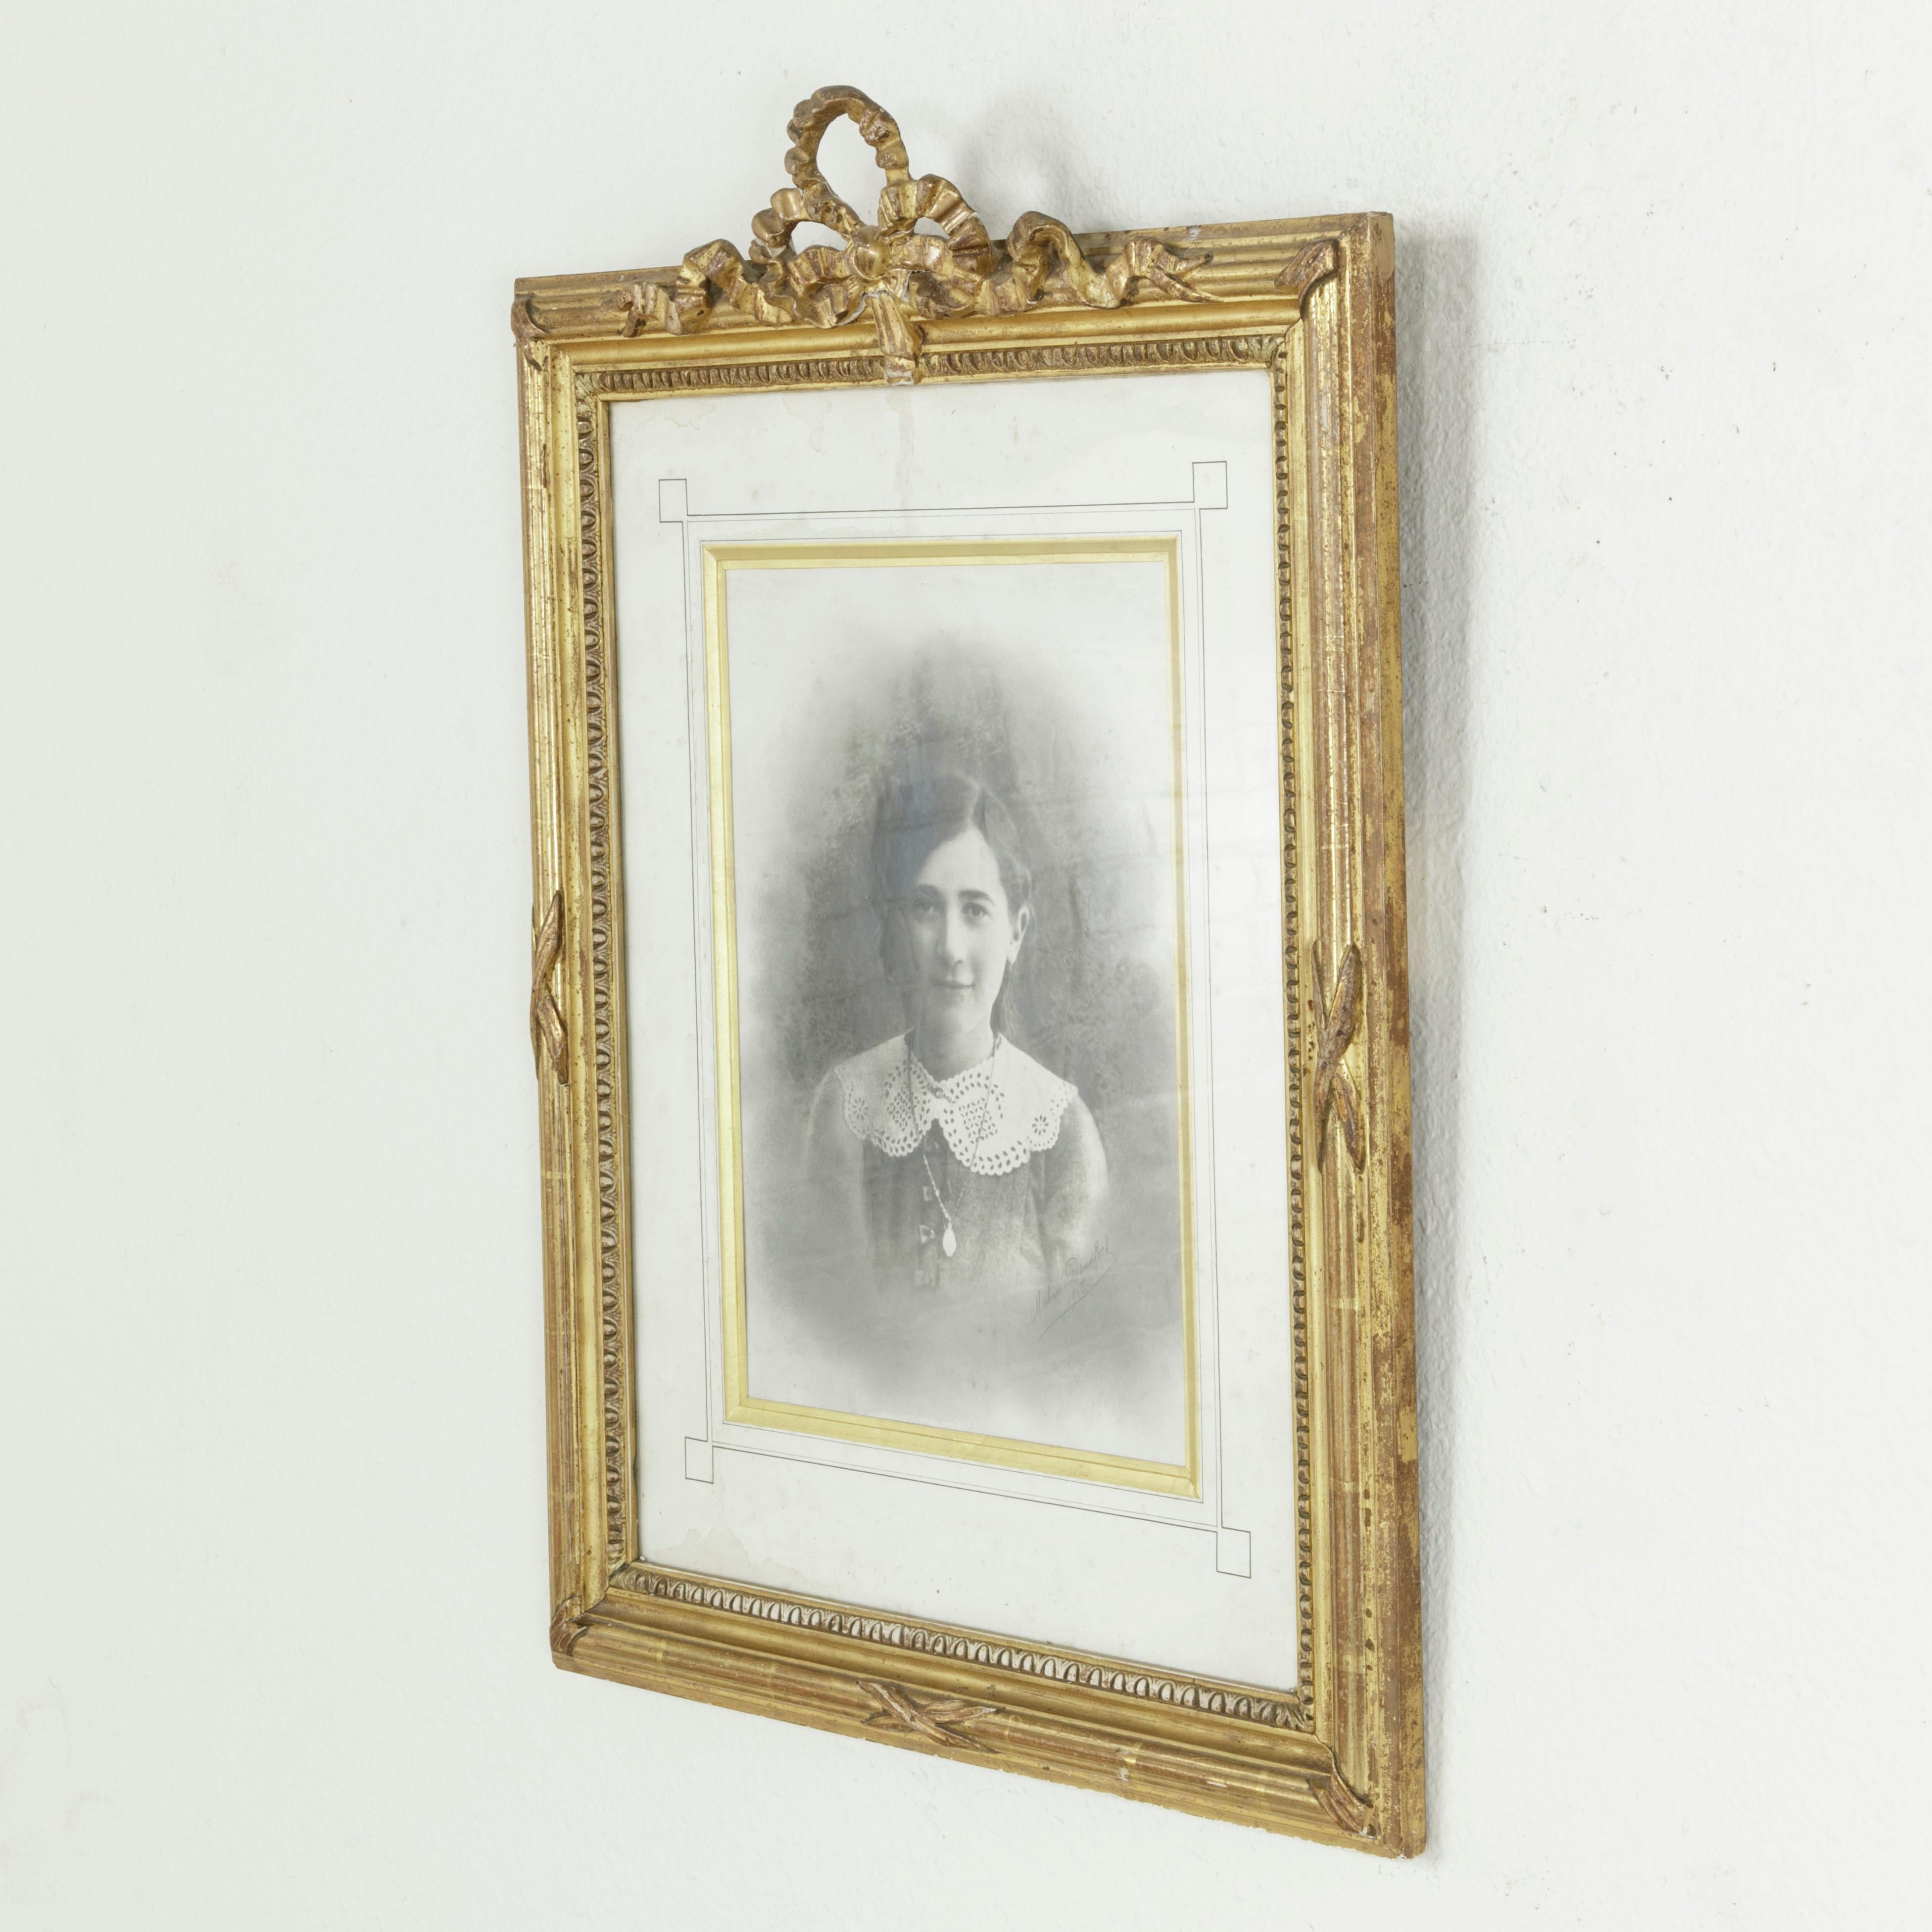 This late nineteenth century French Louis XVI style gilt wood frame features a classic knotted ribbon at the top. The frame is additionally detailed with a crossed ribbon motif and the inner part of the frame has an egg and dart pattern. In the